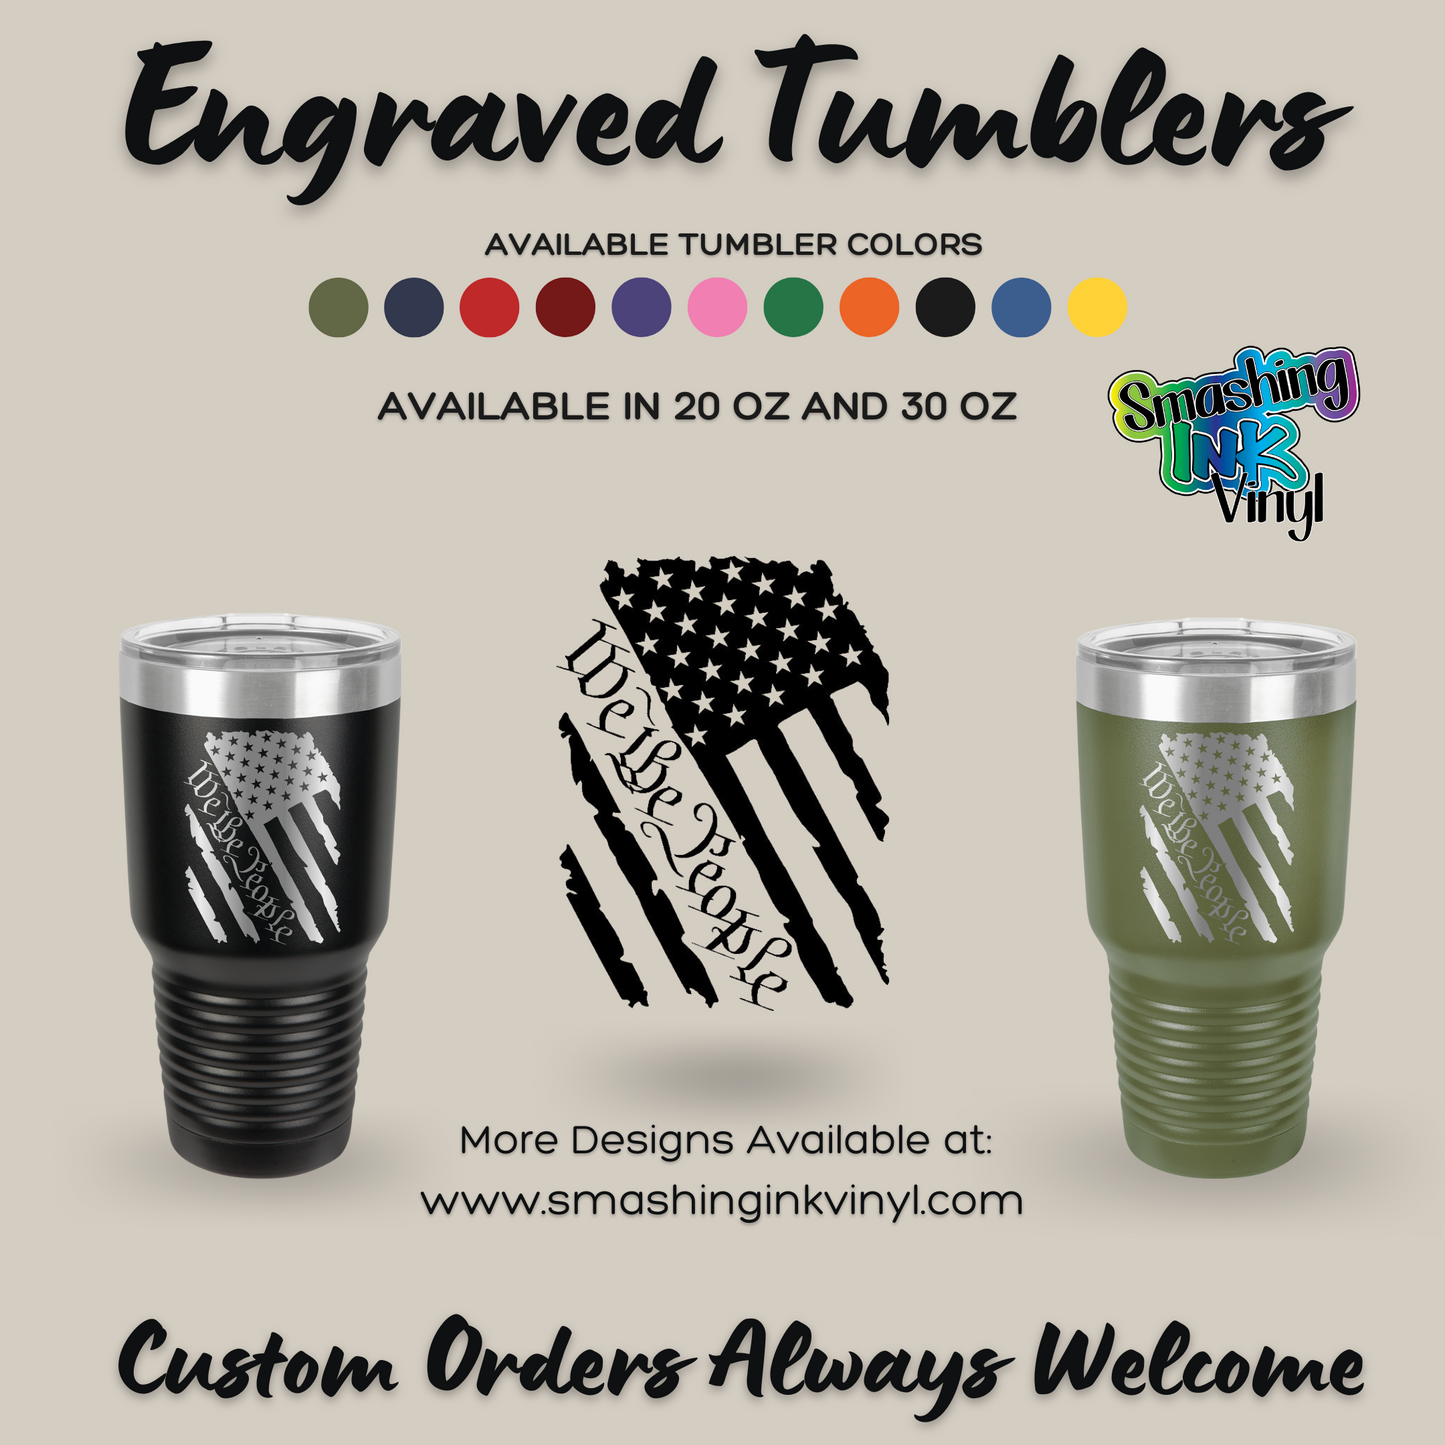 We the People - Engraved Tumblers (TAT 3-5 BUS DAYS)